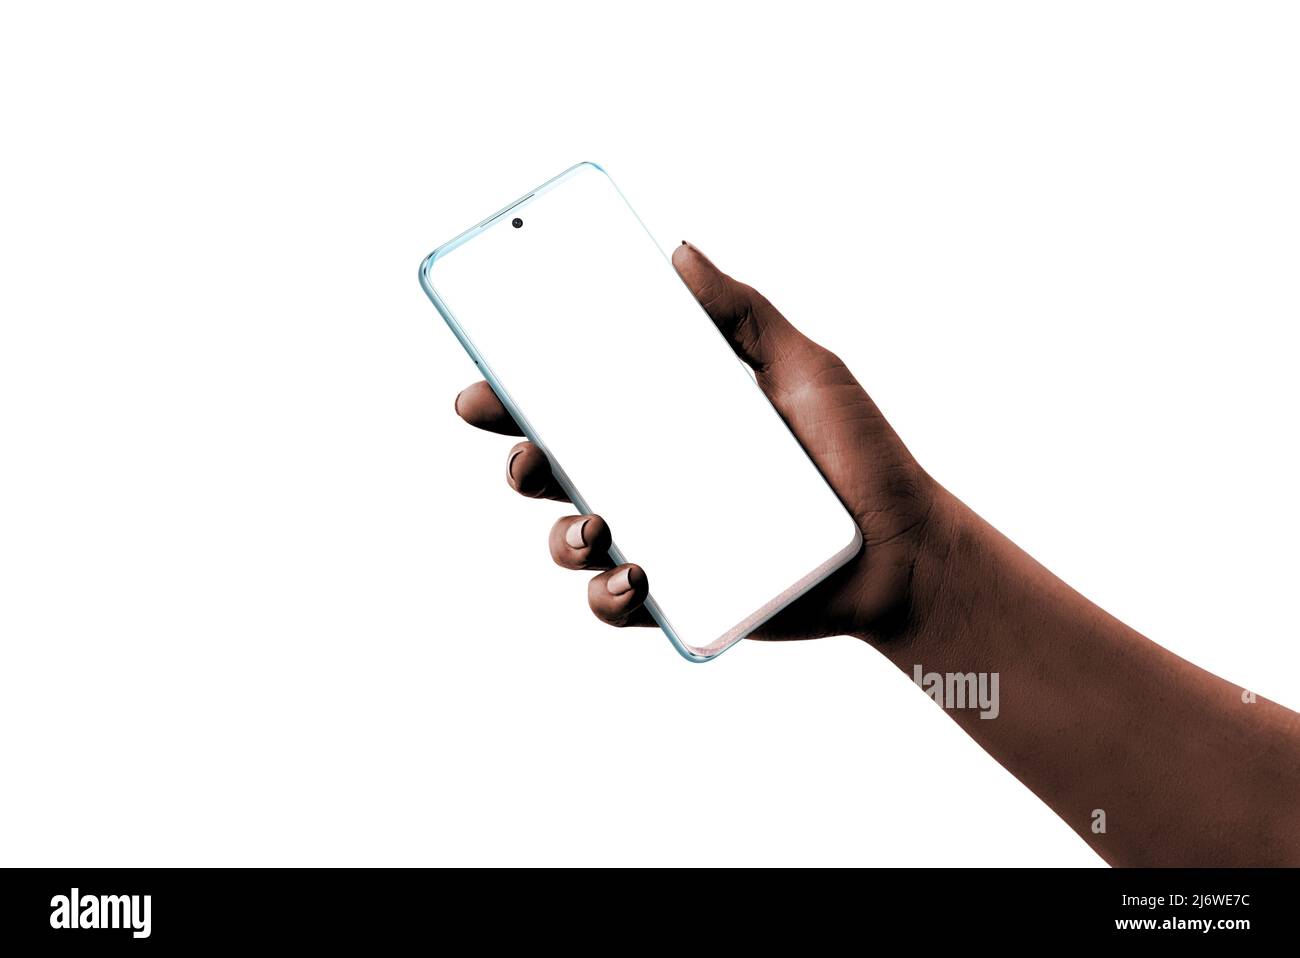 Hand showing white perla modern smart phone with isolated screen and background for mockup, app design presentation. Low light, dark skin hand Stock Photo